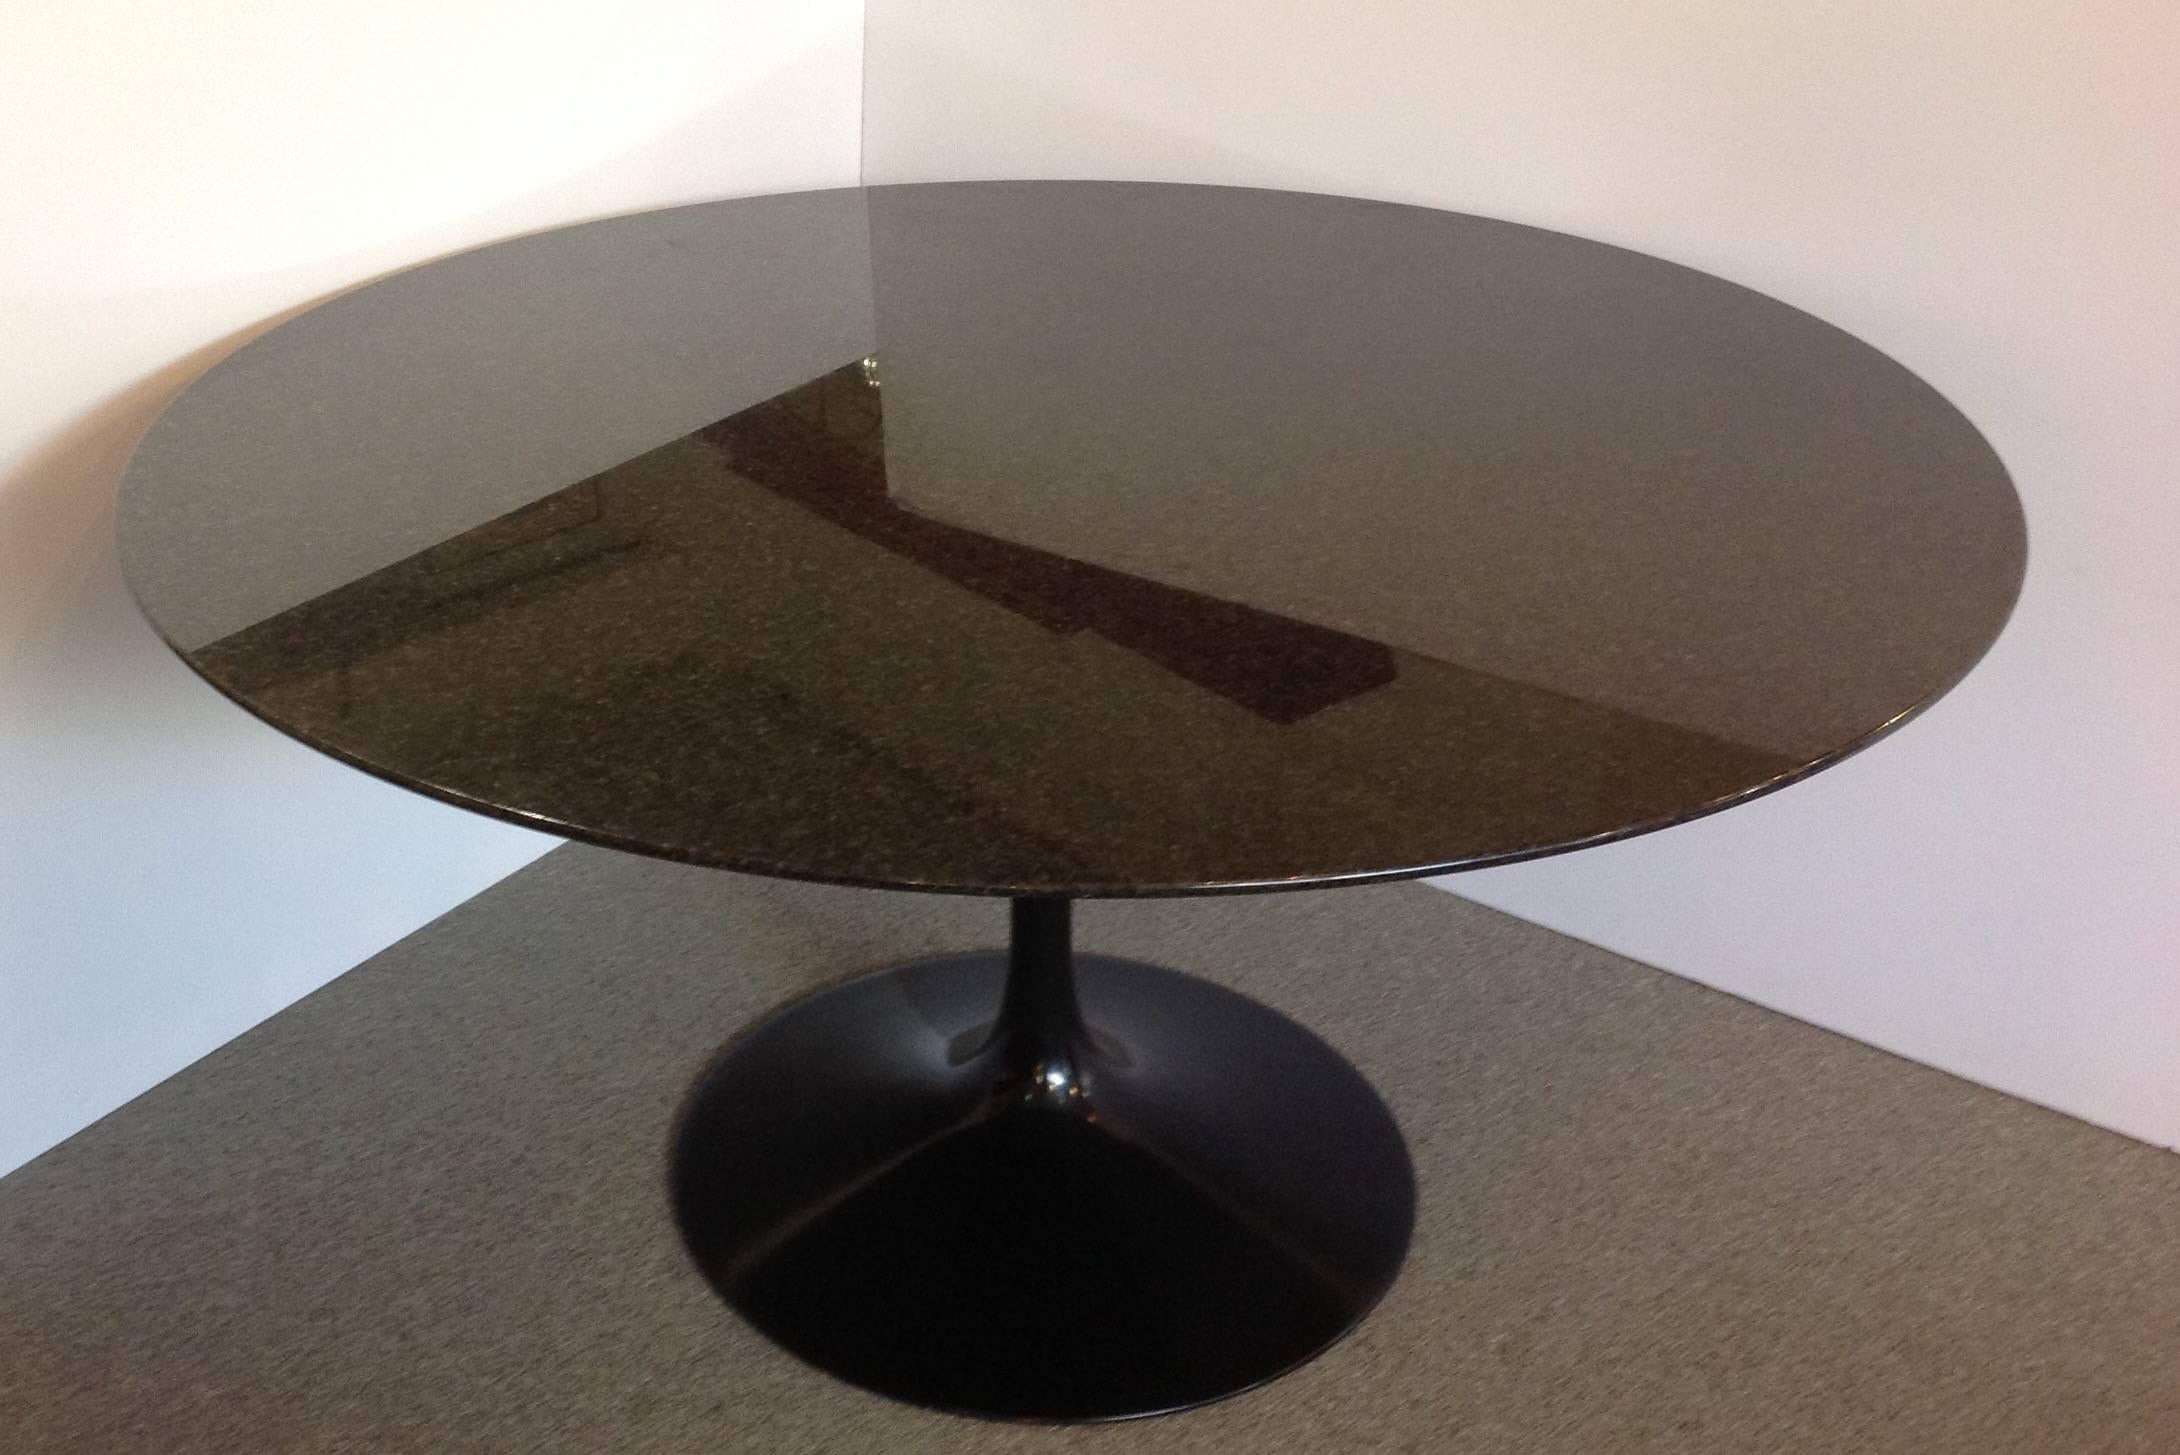 Iconic round dining table with metal pedestal designed by Saarinen and made by Knoll. The gorgeous granite top was a custom order in the 1960s. It is in very good original condition.